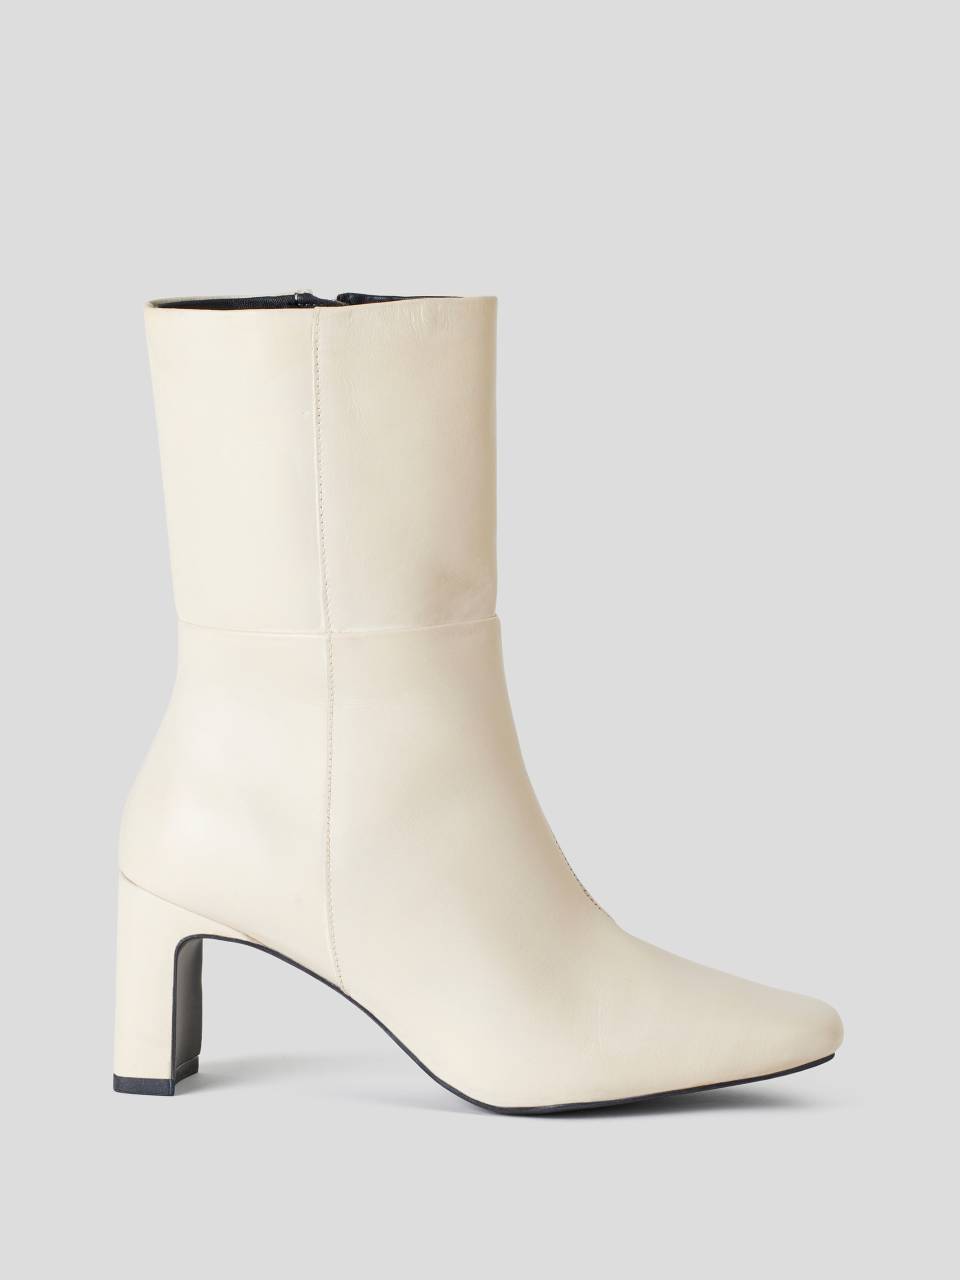 ALDO Laurella Heeled Ankle Boots in White | Lyst UK